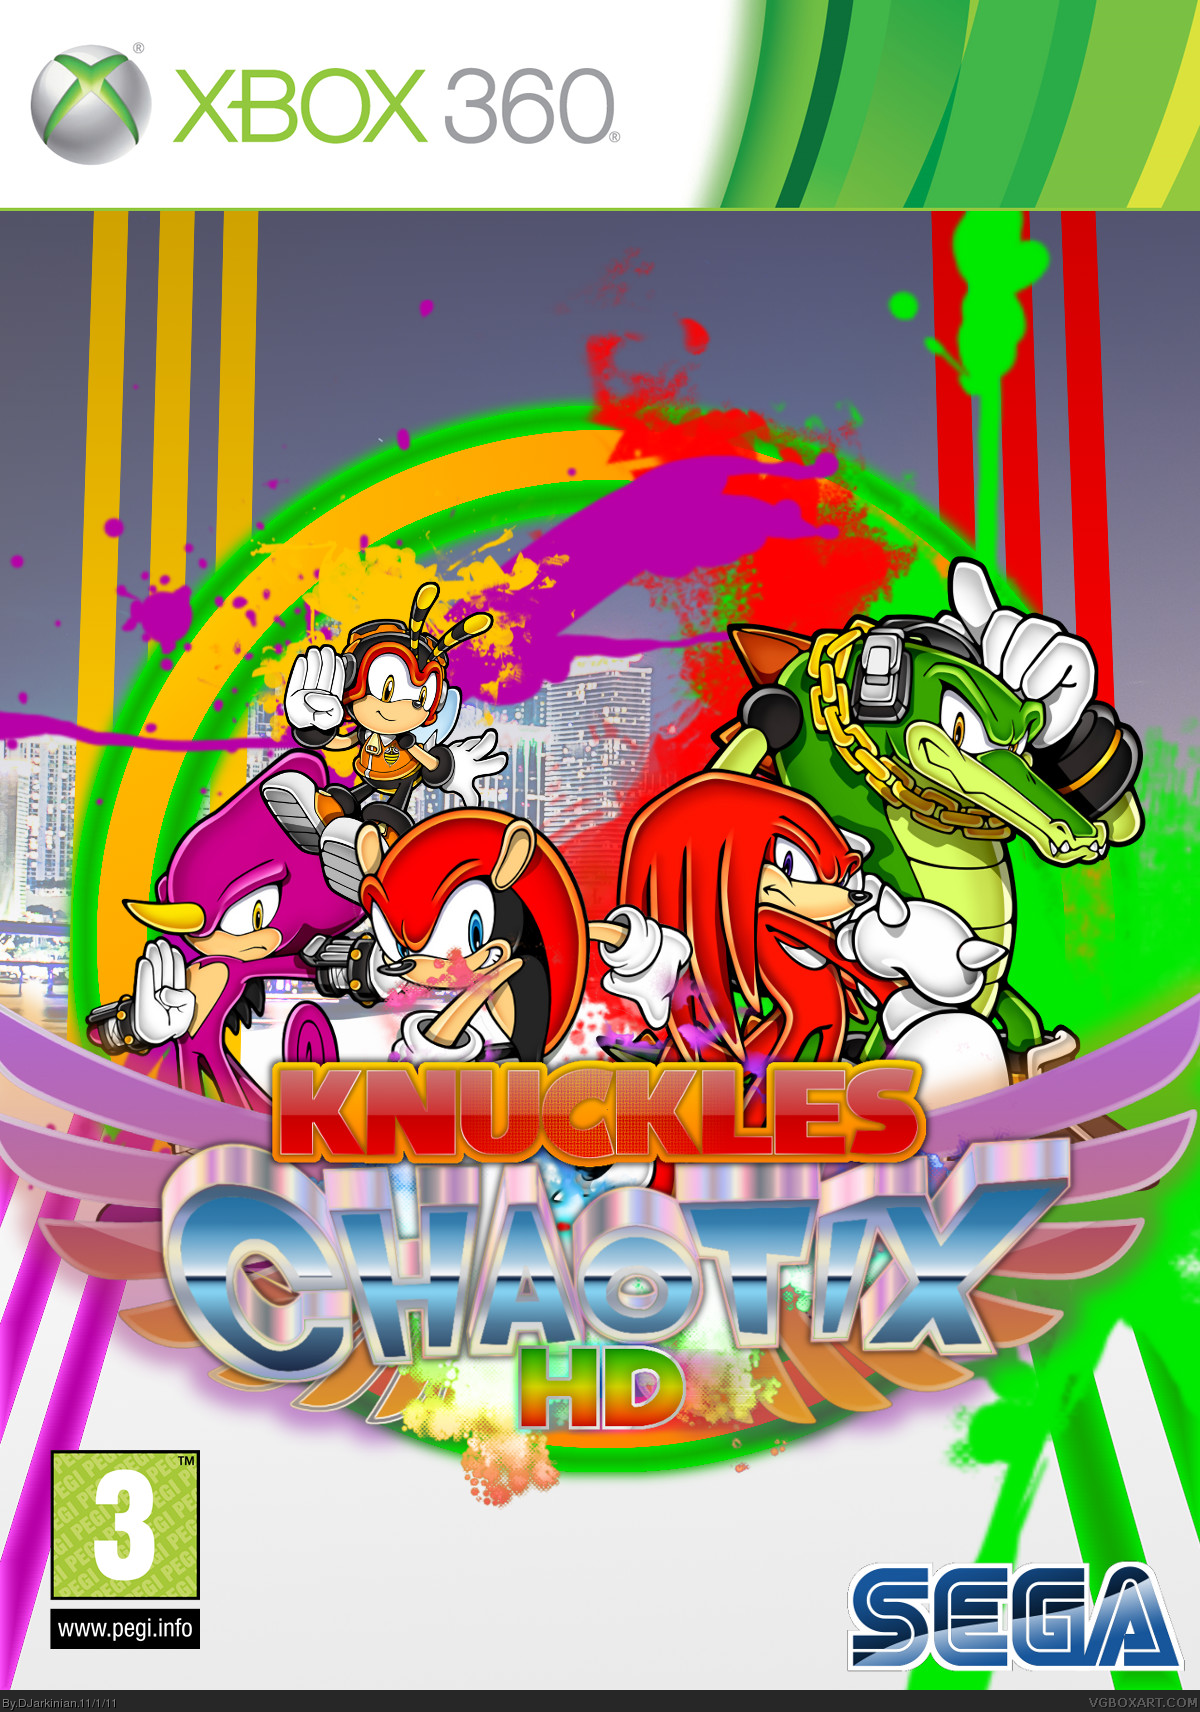 Knuckles' Chaotix HD box cover